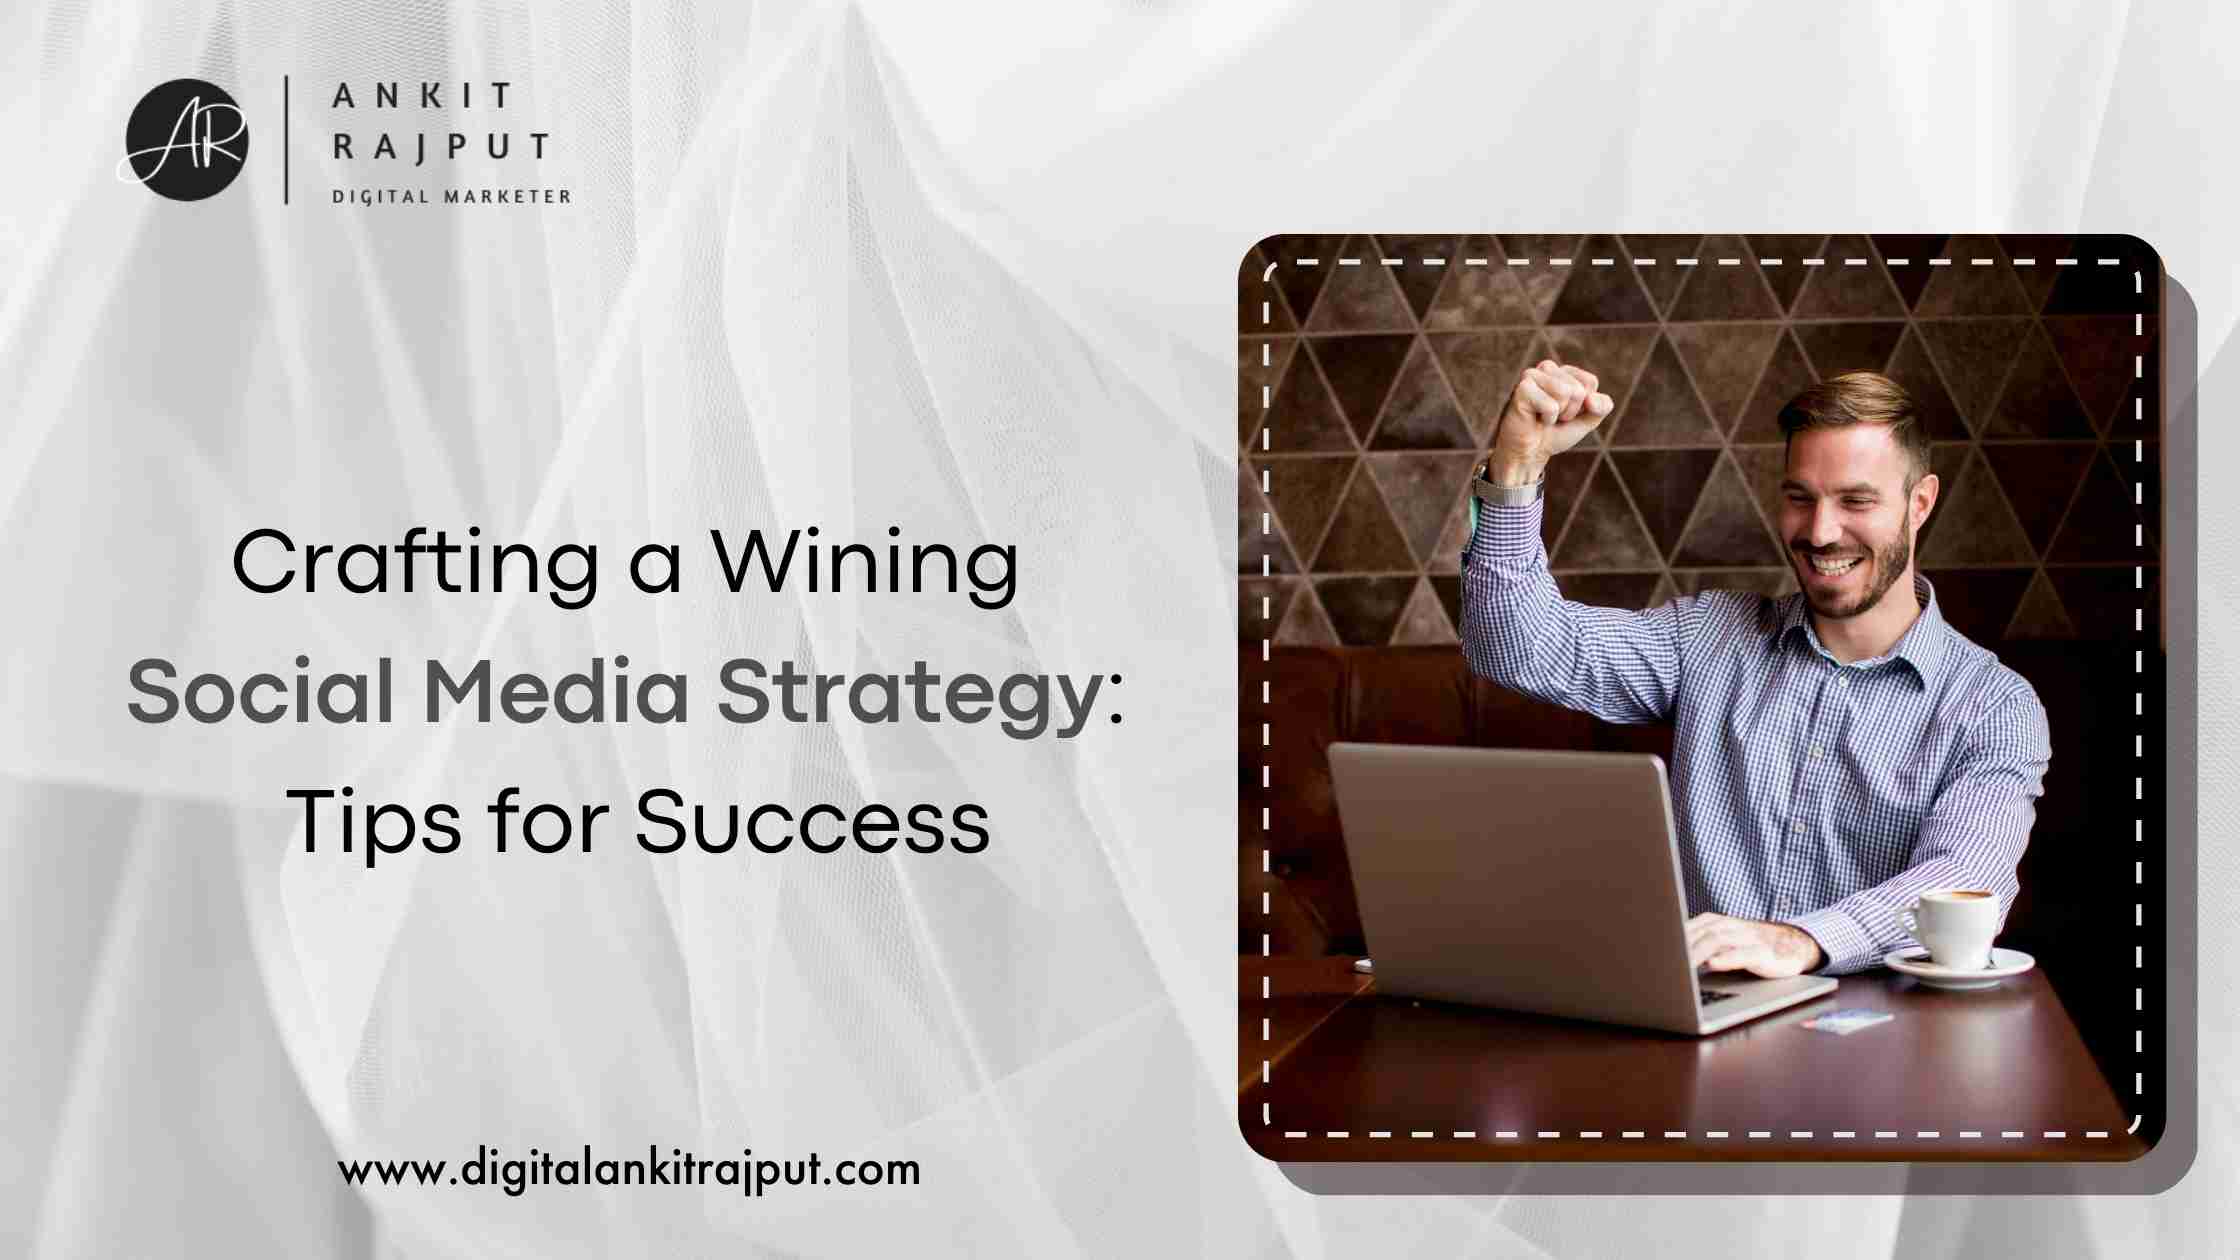 Crafting a Winning Social Media Strategy: Tips for Success